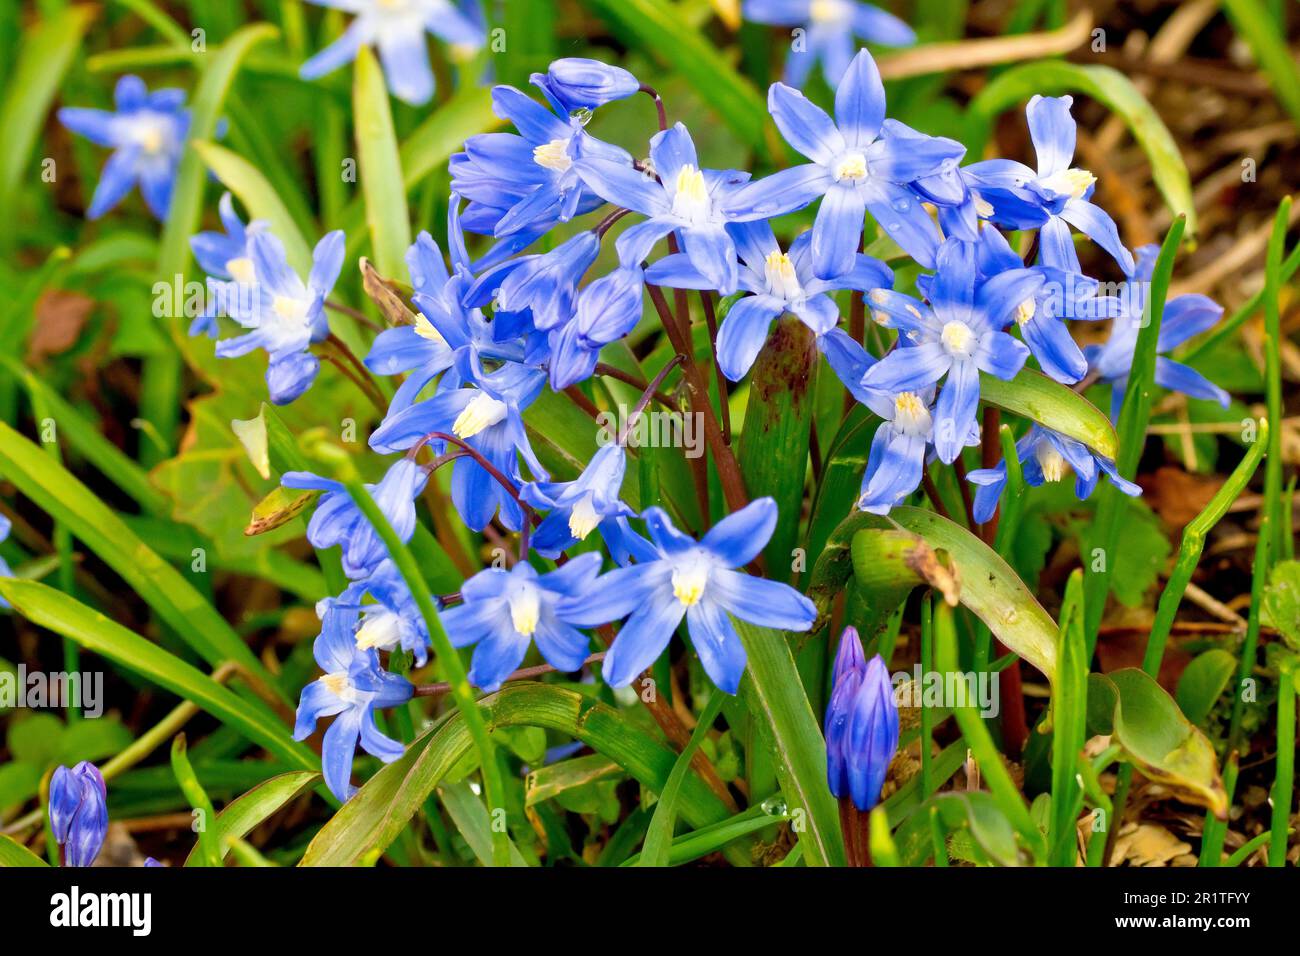 Spring Squill (scilla verna, possibly scilla forbesii), close up of a cluster of the bright blue spring flowers, most likely a garden escapee. Stock Photo